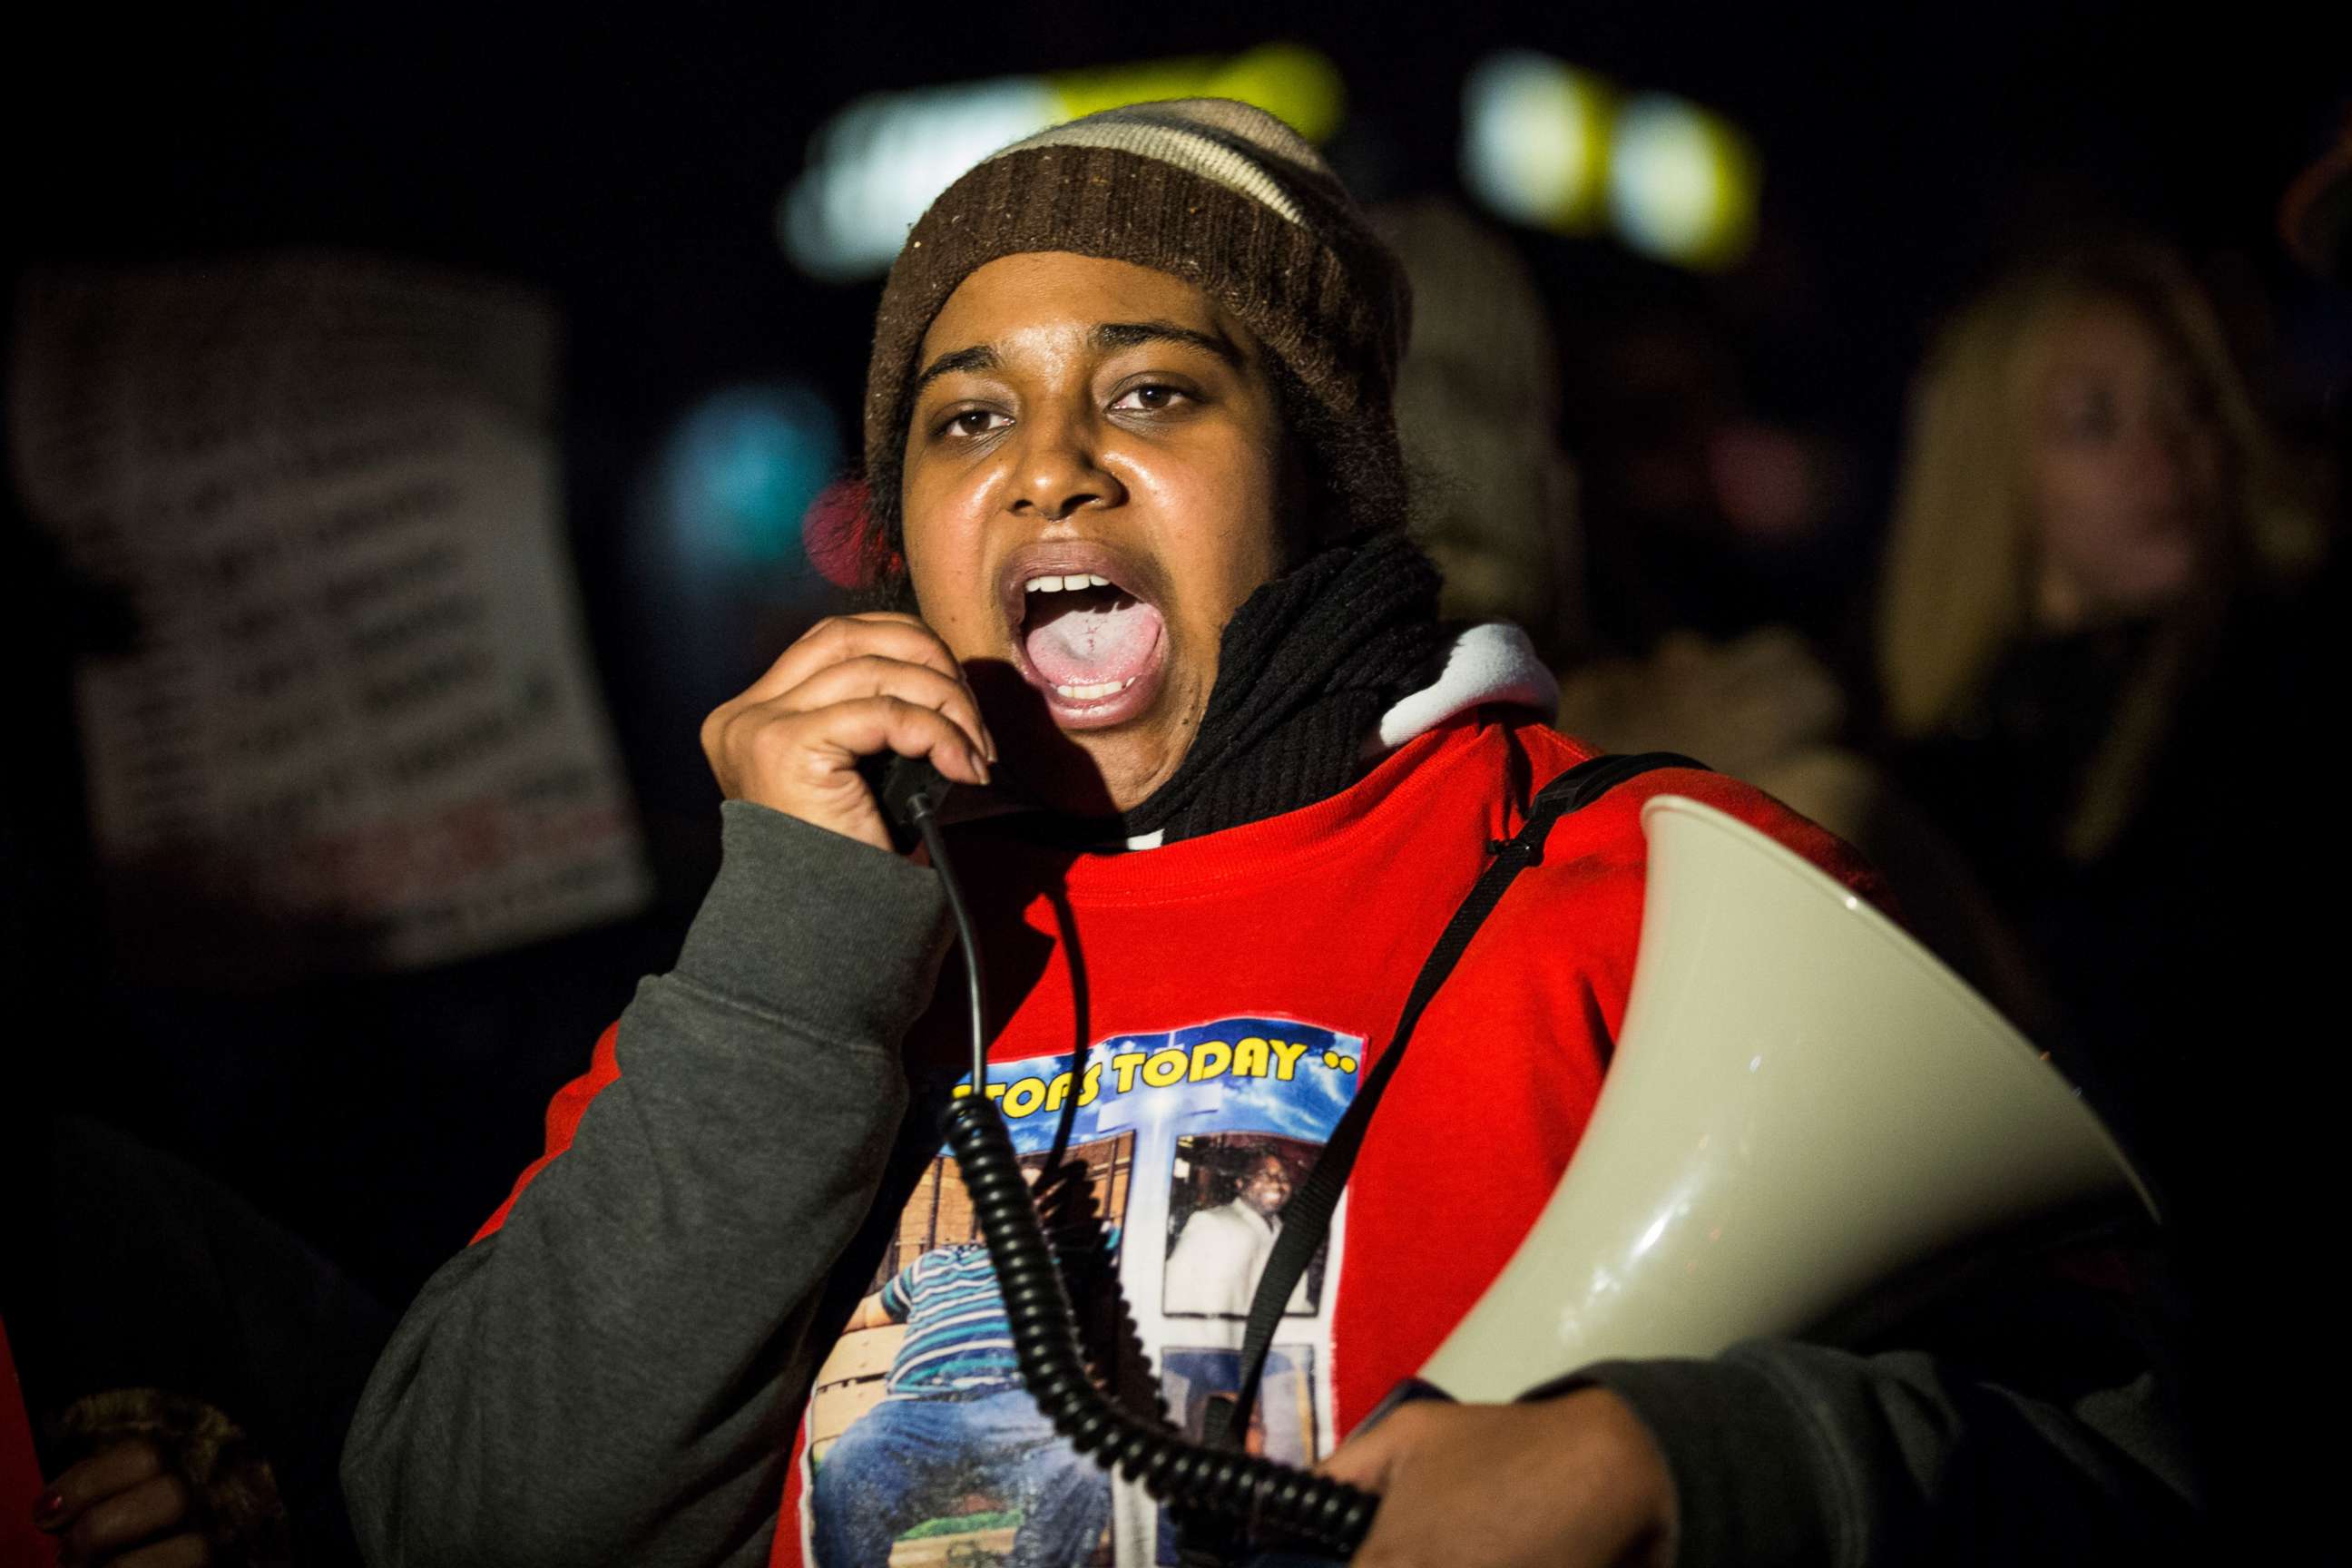 PHOTO: Erica Garner leads a march of people protesting the Staten Island, New York grand jury's decision not to indict a police officer involved in the choke-hold death of her father Eric Garner in July, on Dec. 11, 2014.